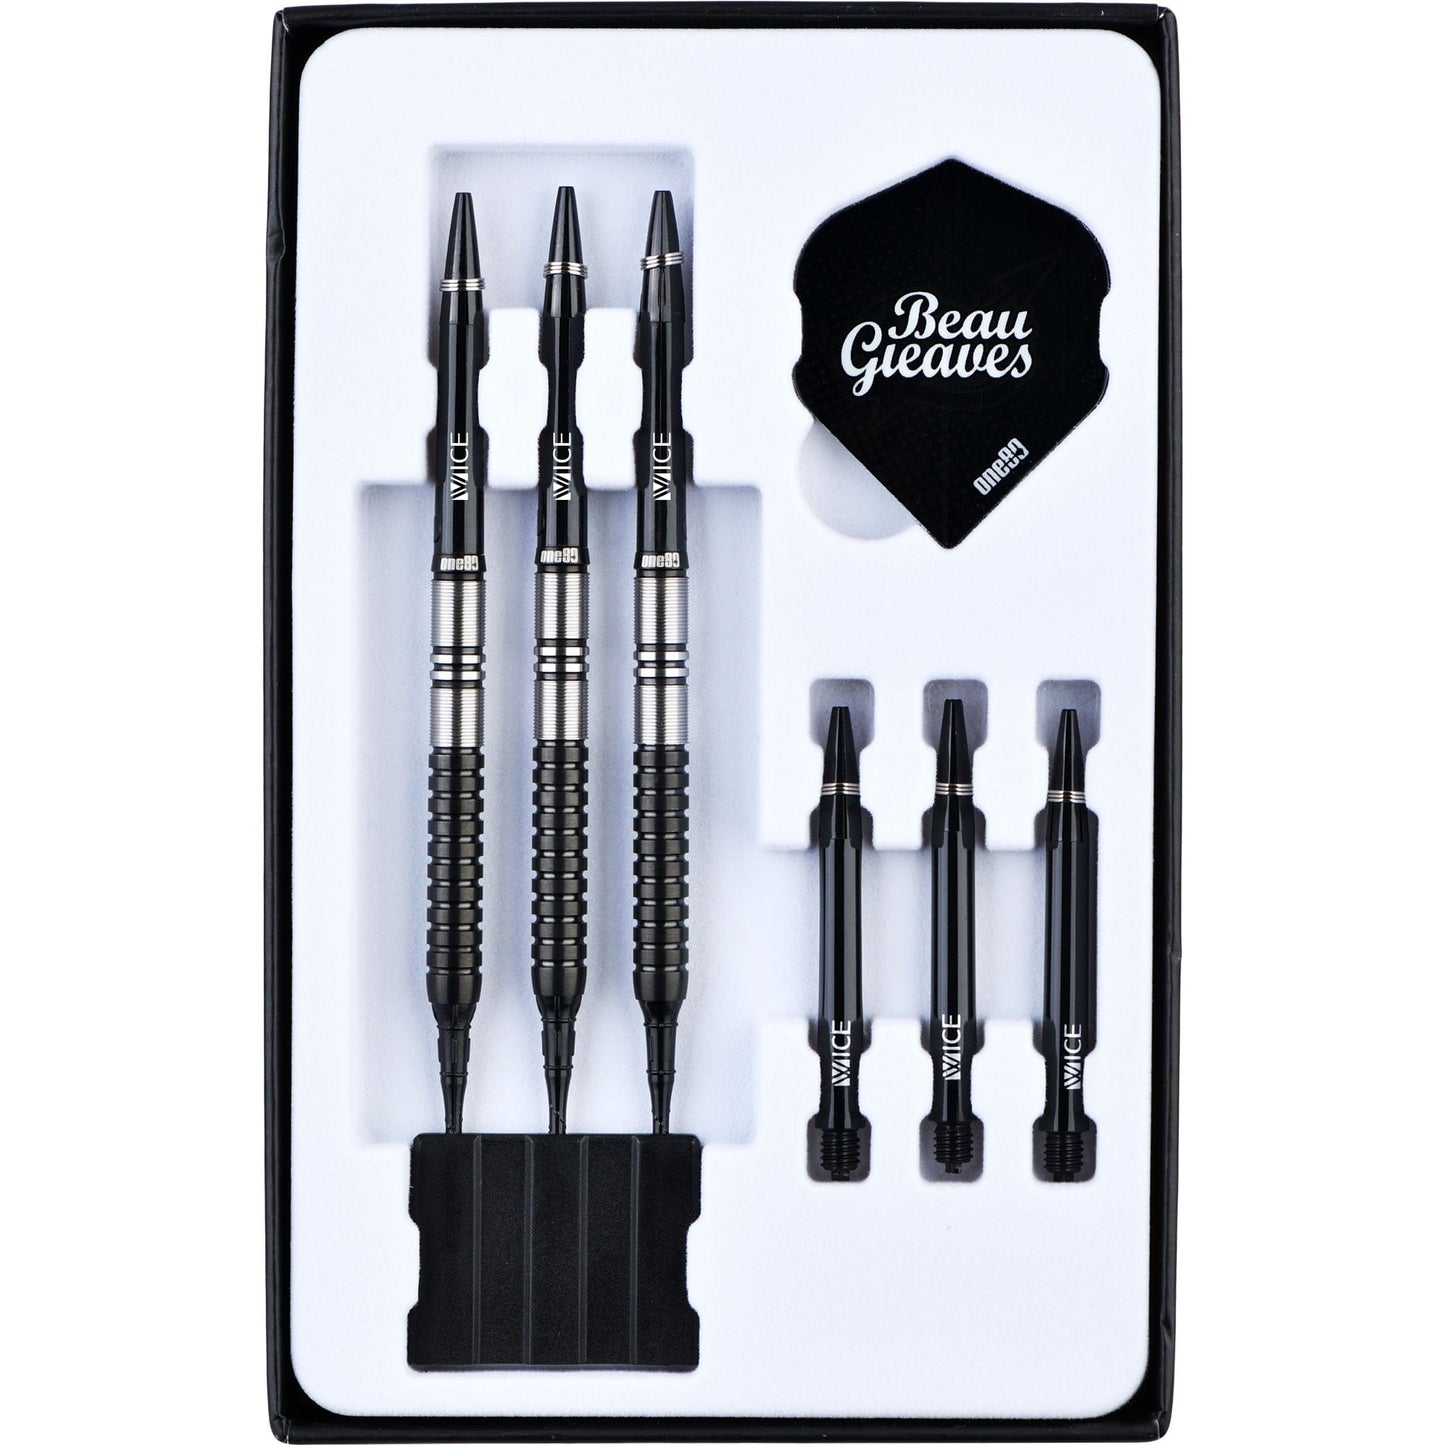 One80 Beau Greaves Darts - Soft Tip - VHD - Black Edition